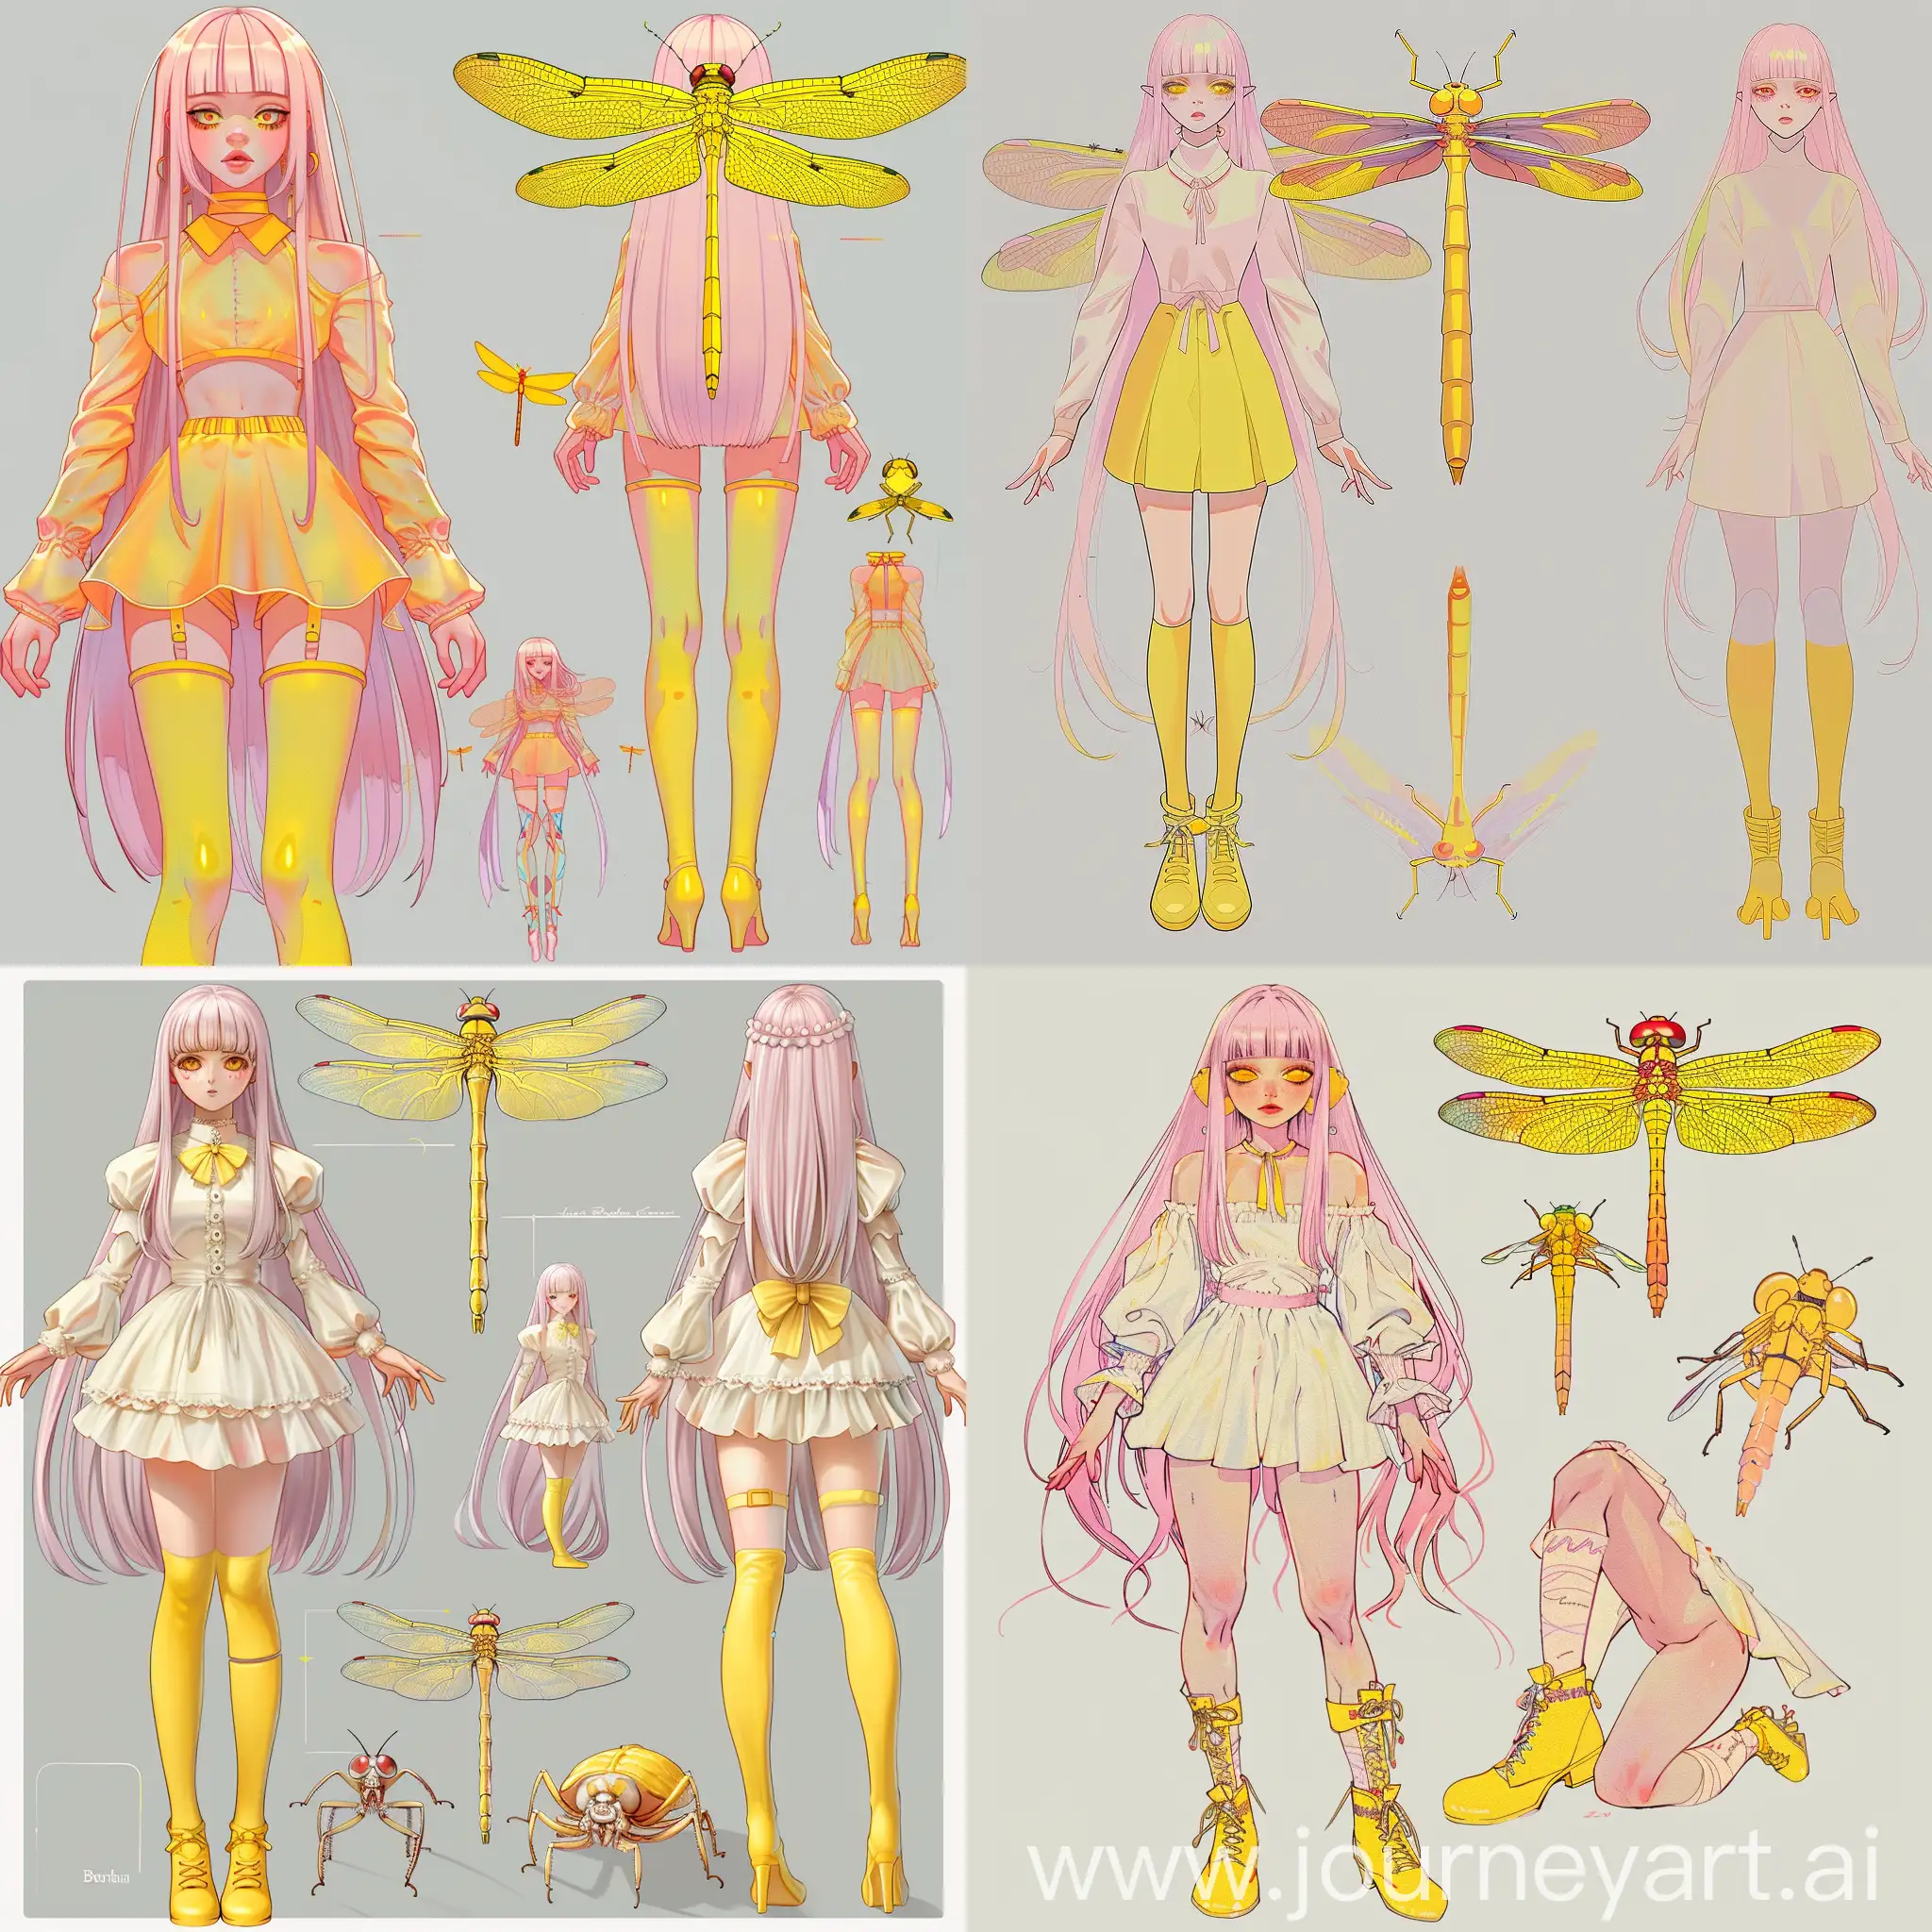 Enchanting-Bertha-with-Yellow-Dragonfly-Whimsical-Pastel-Pinkhaired-Girl-in-a-Stylish-Dress